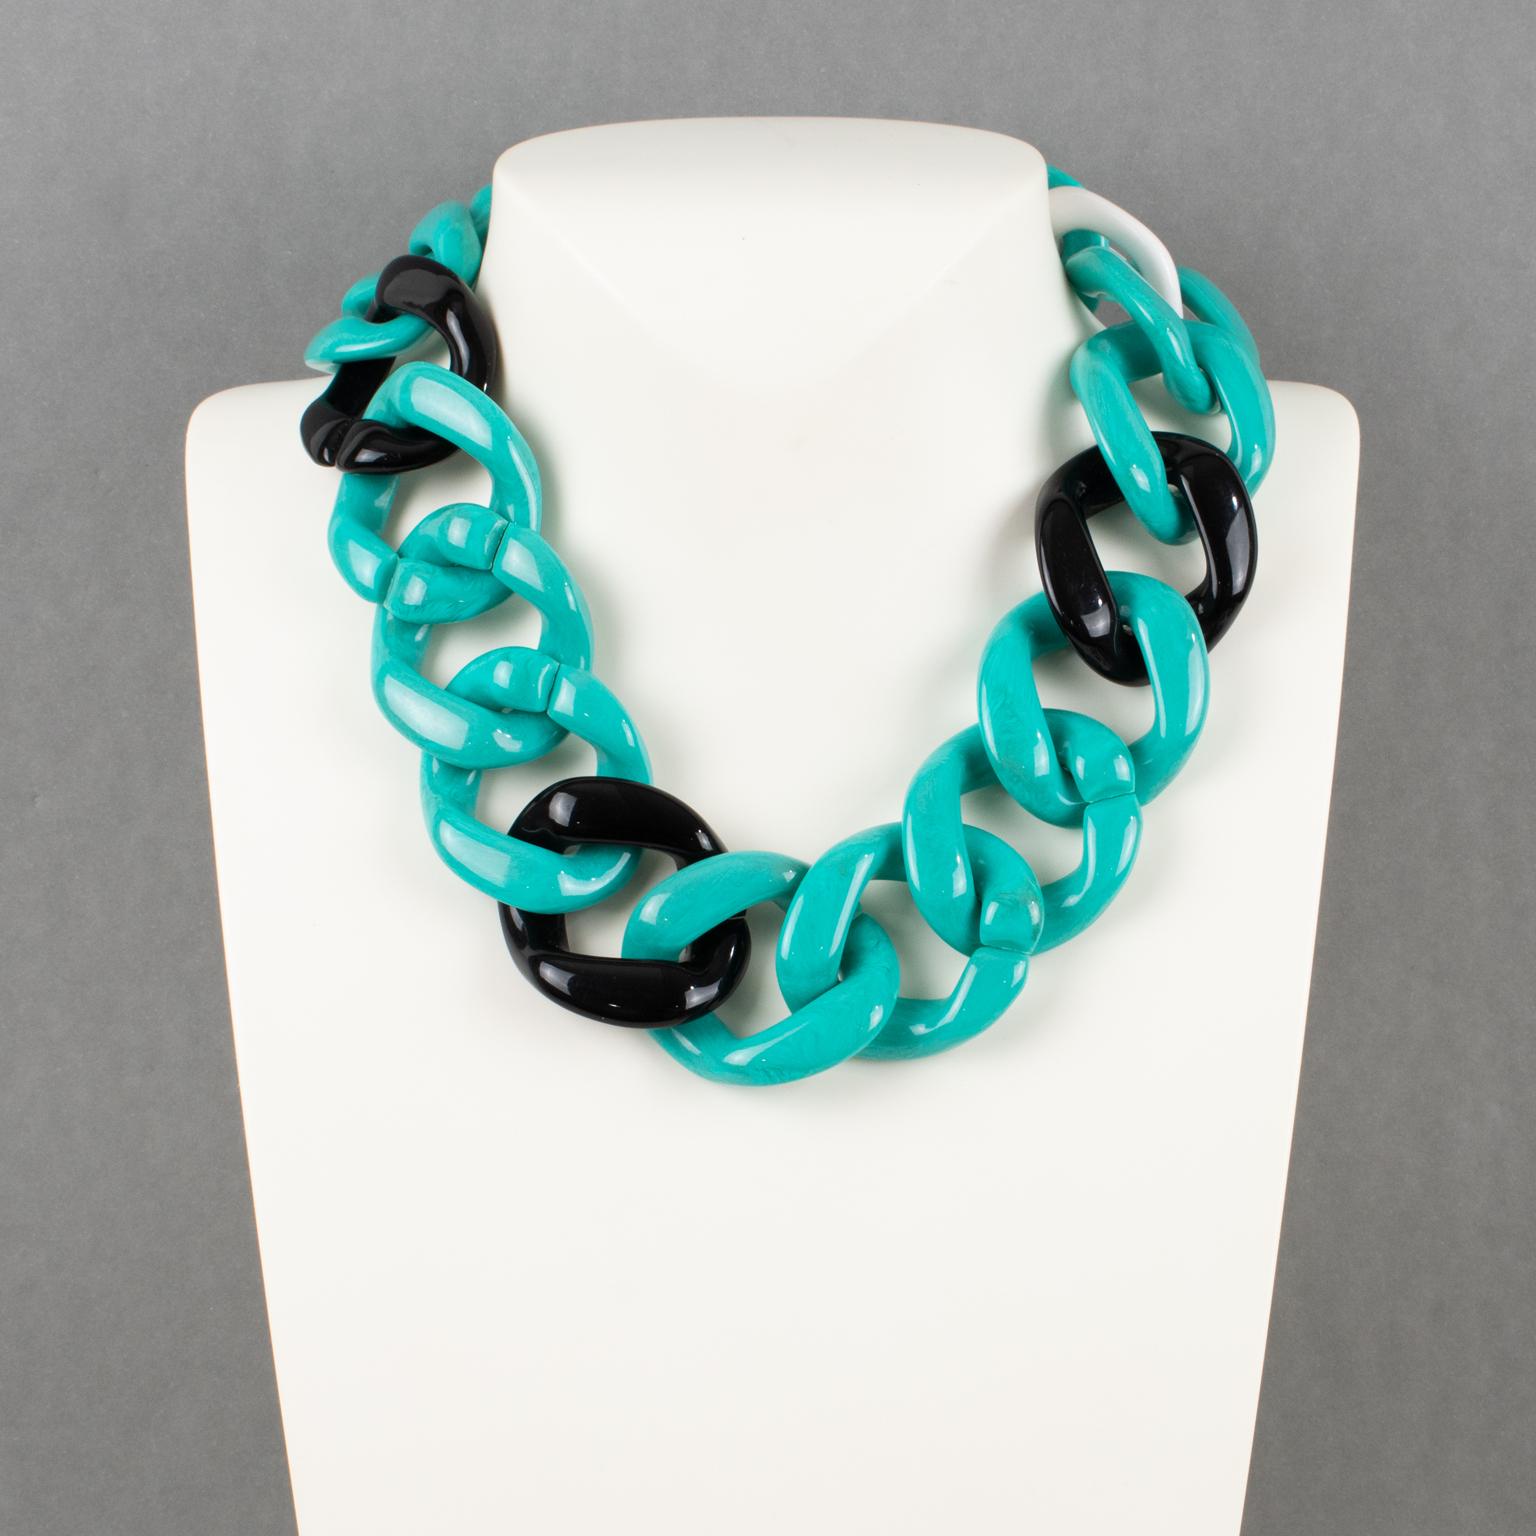 Modern Angela Caputi Italy Choker Necklace Massive Turquoise Resin Chain For Sale